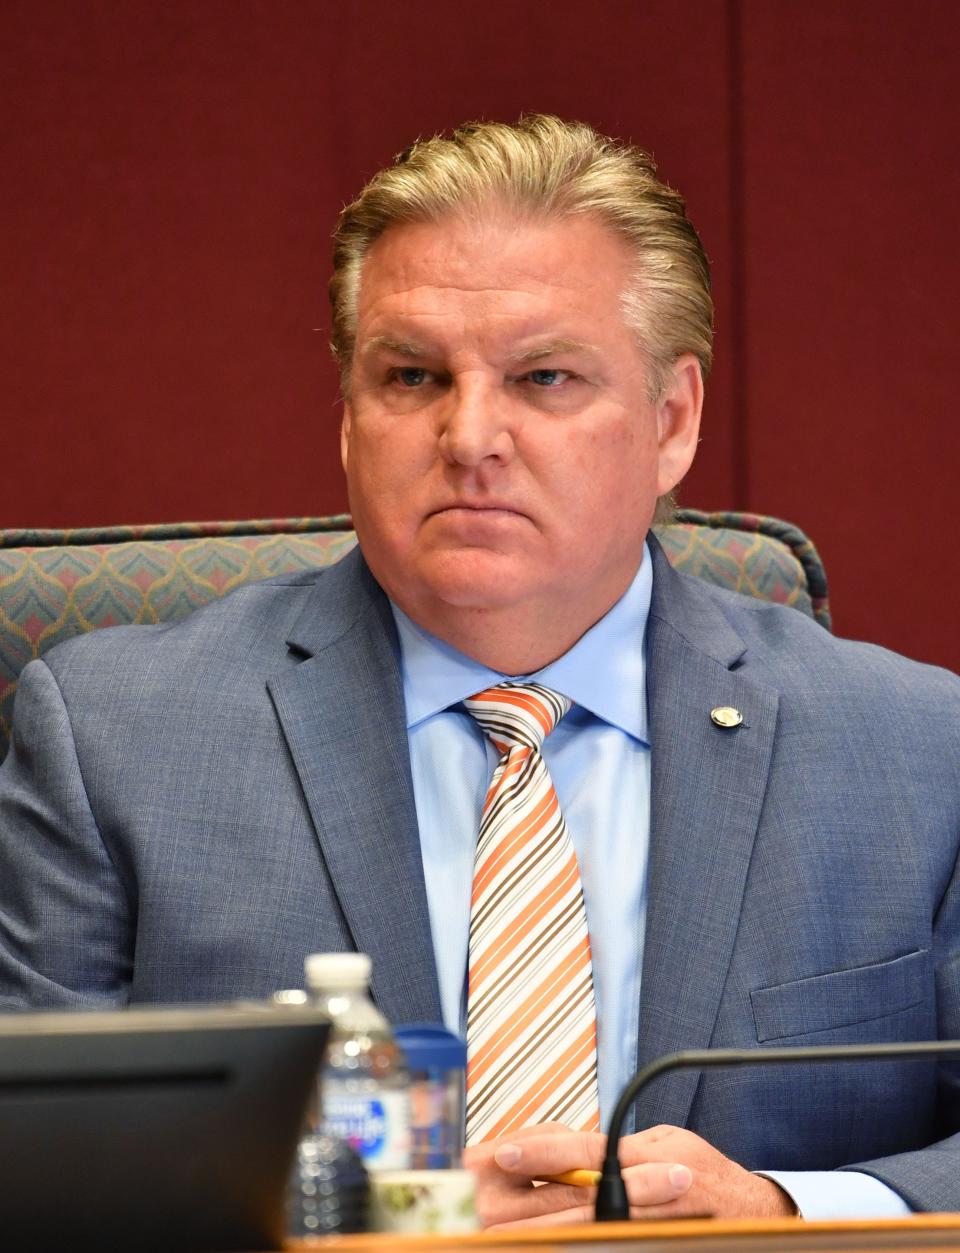 Sarasota County Commissioner Mike Moran, pictured here, represents the county's District 1. Columnist Carrie Seidman says Moran's grandstanding on issues such as protecting the county's safety net of services is one reason why funding for a 211 helpline will end April 1.